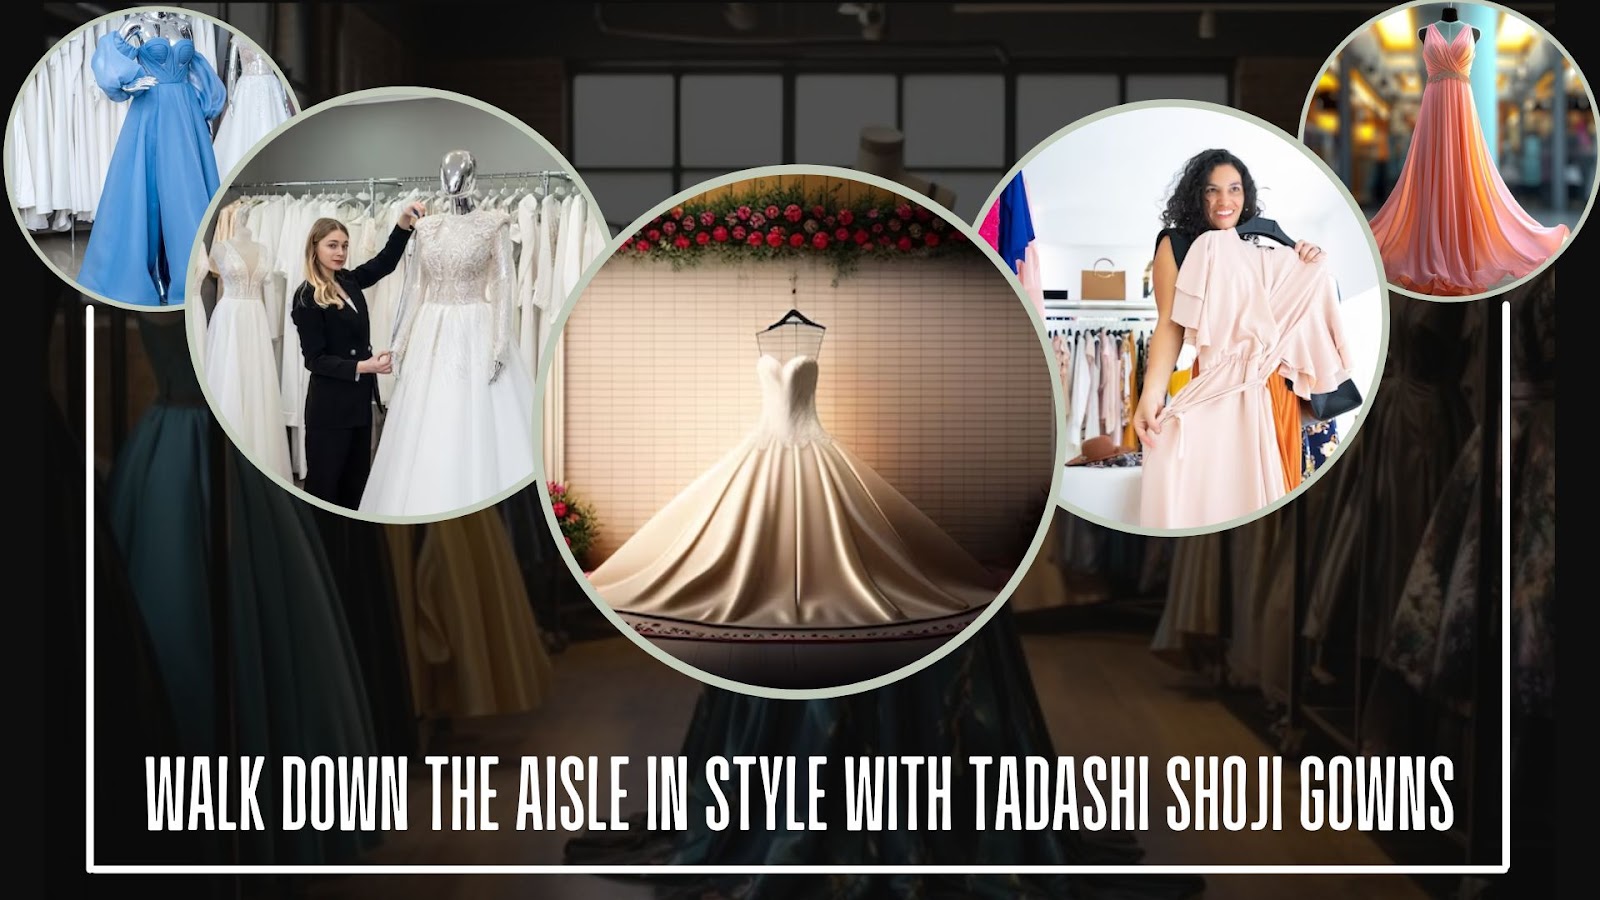 Walk Down the Aisle in Style with Tadashi Shoji Gowns